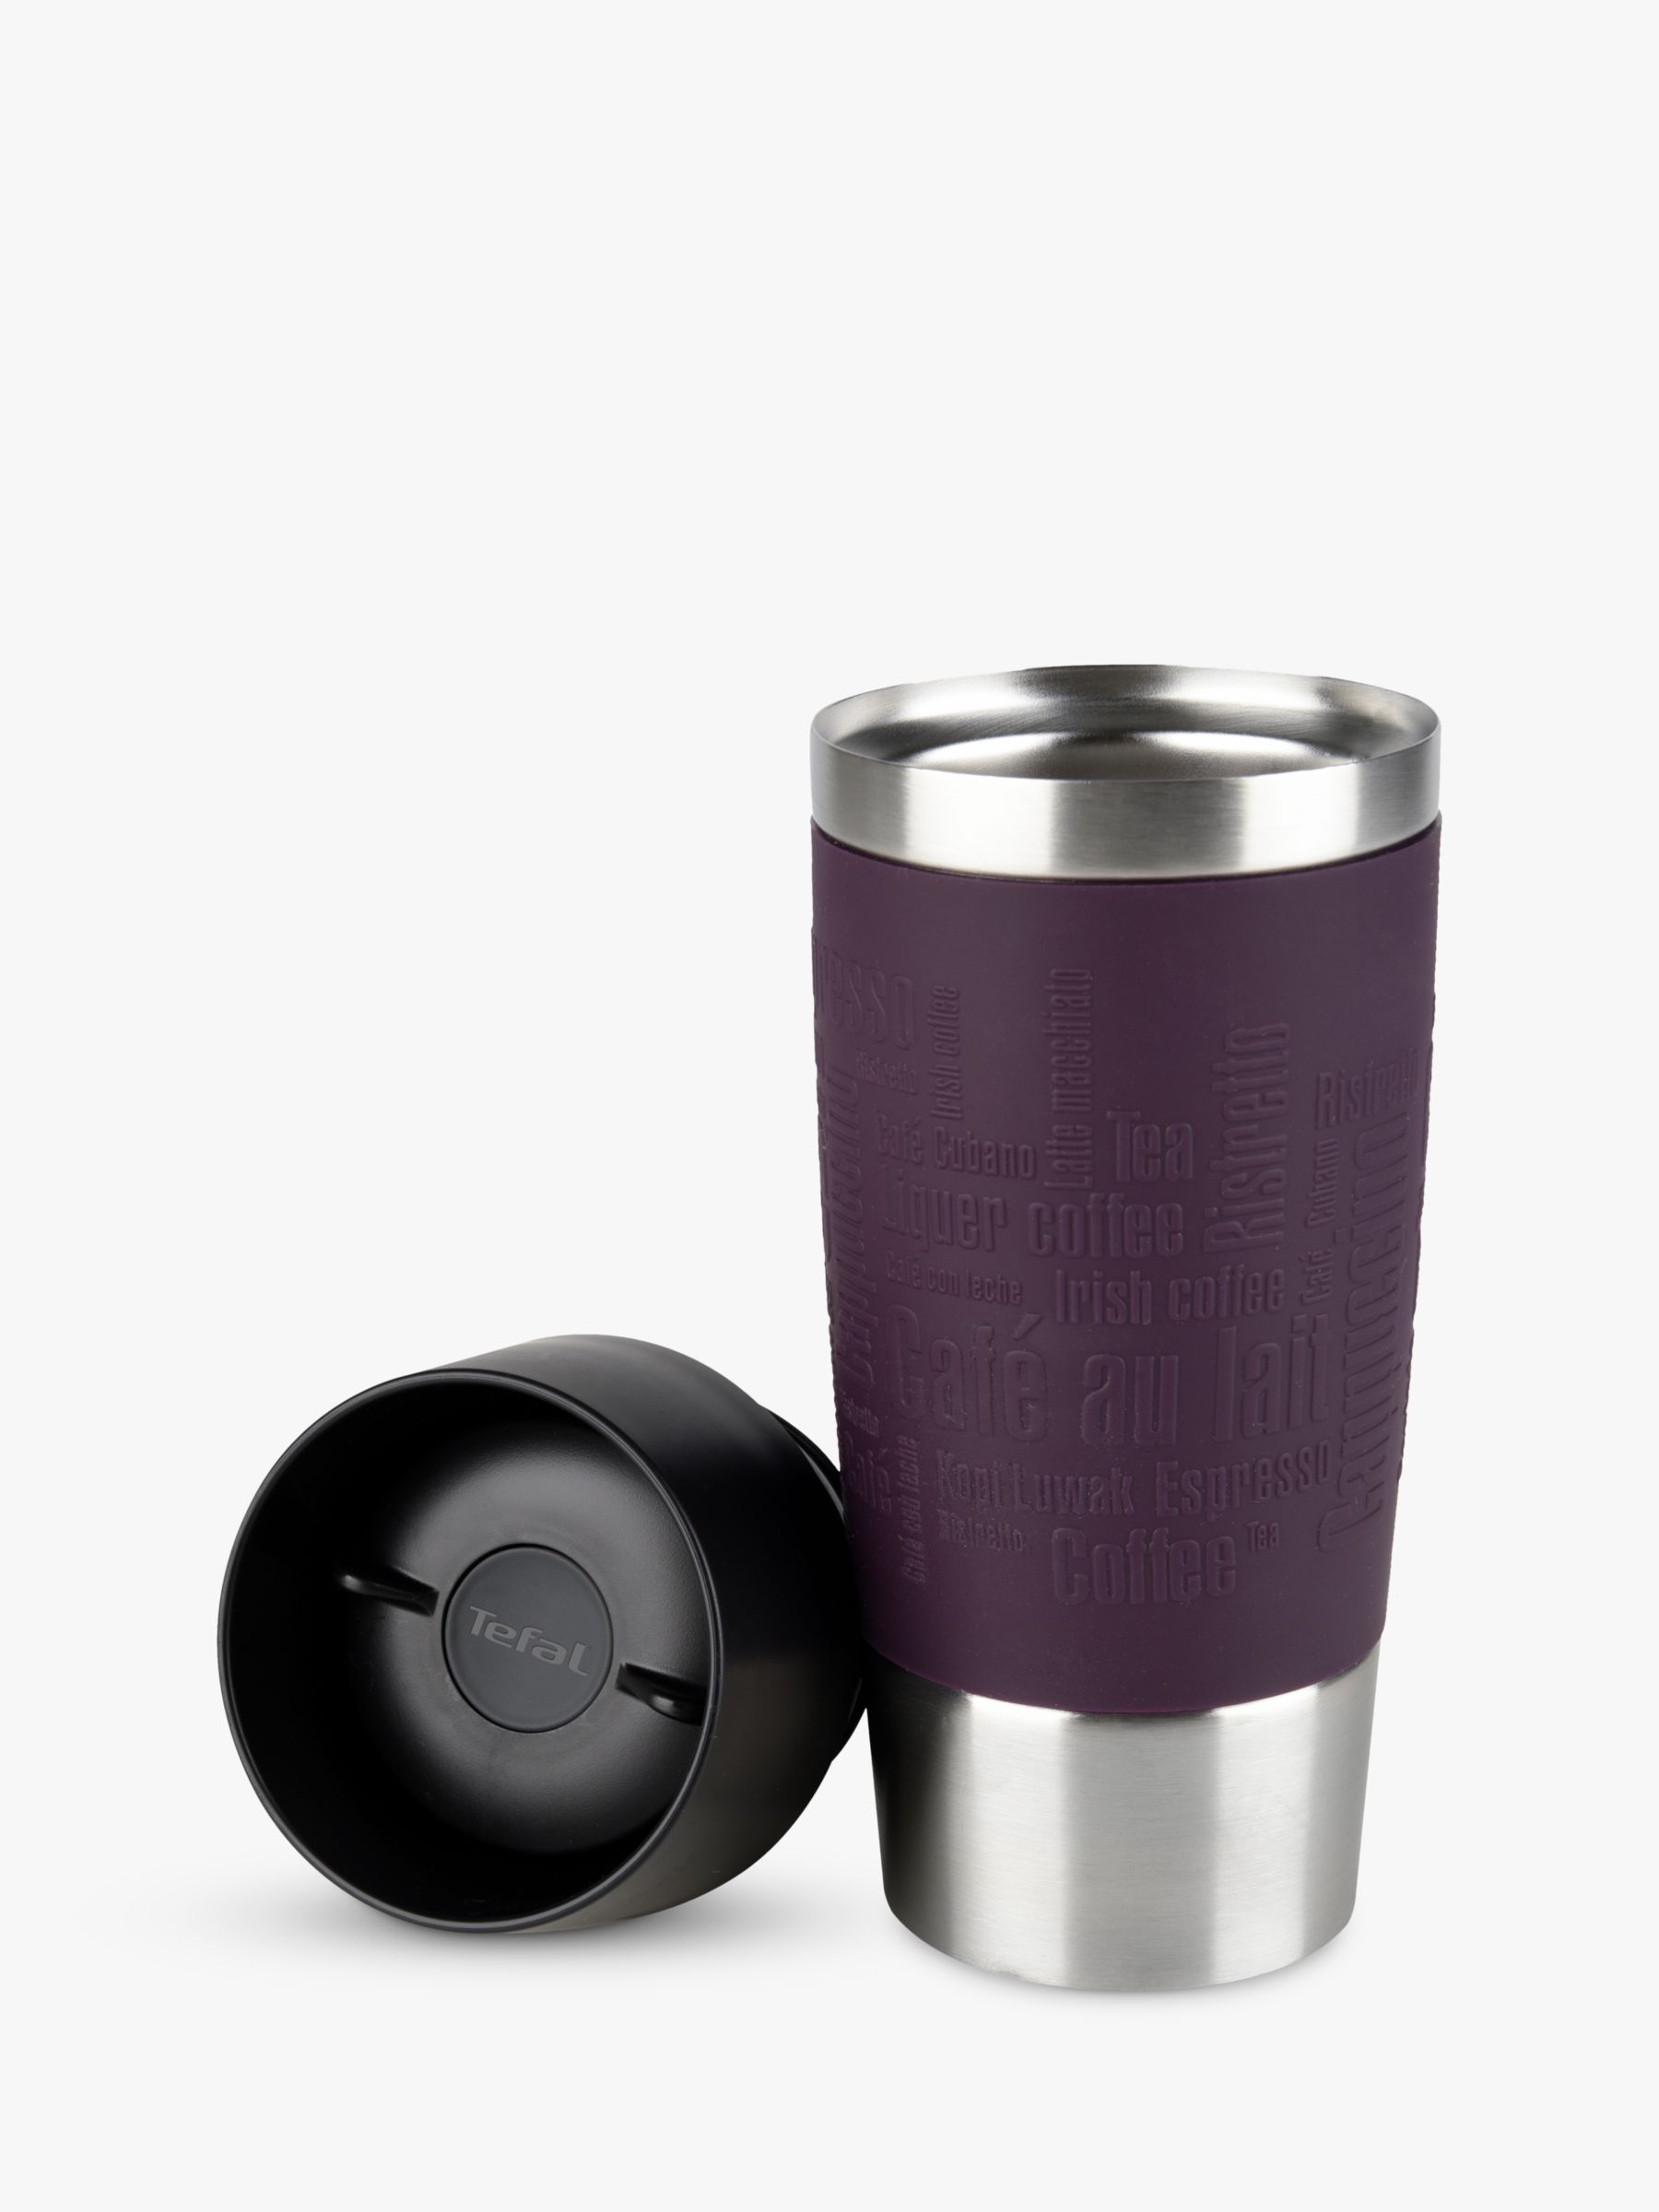 Tiger Push Type Thermos Black and Silver 1.9 Liter, Thermos & Flask, Diningware & Serveware, Houseware, Household, All Brands